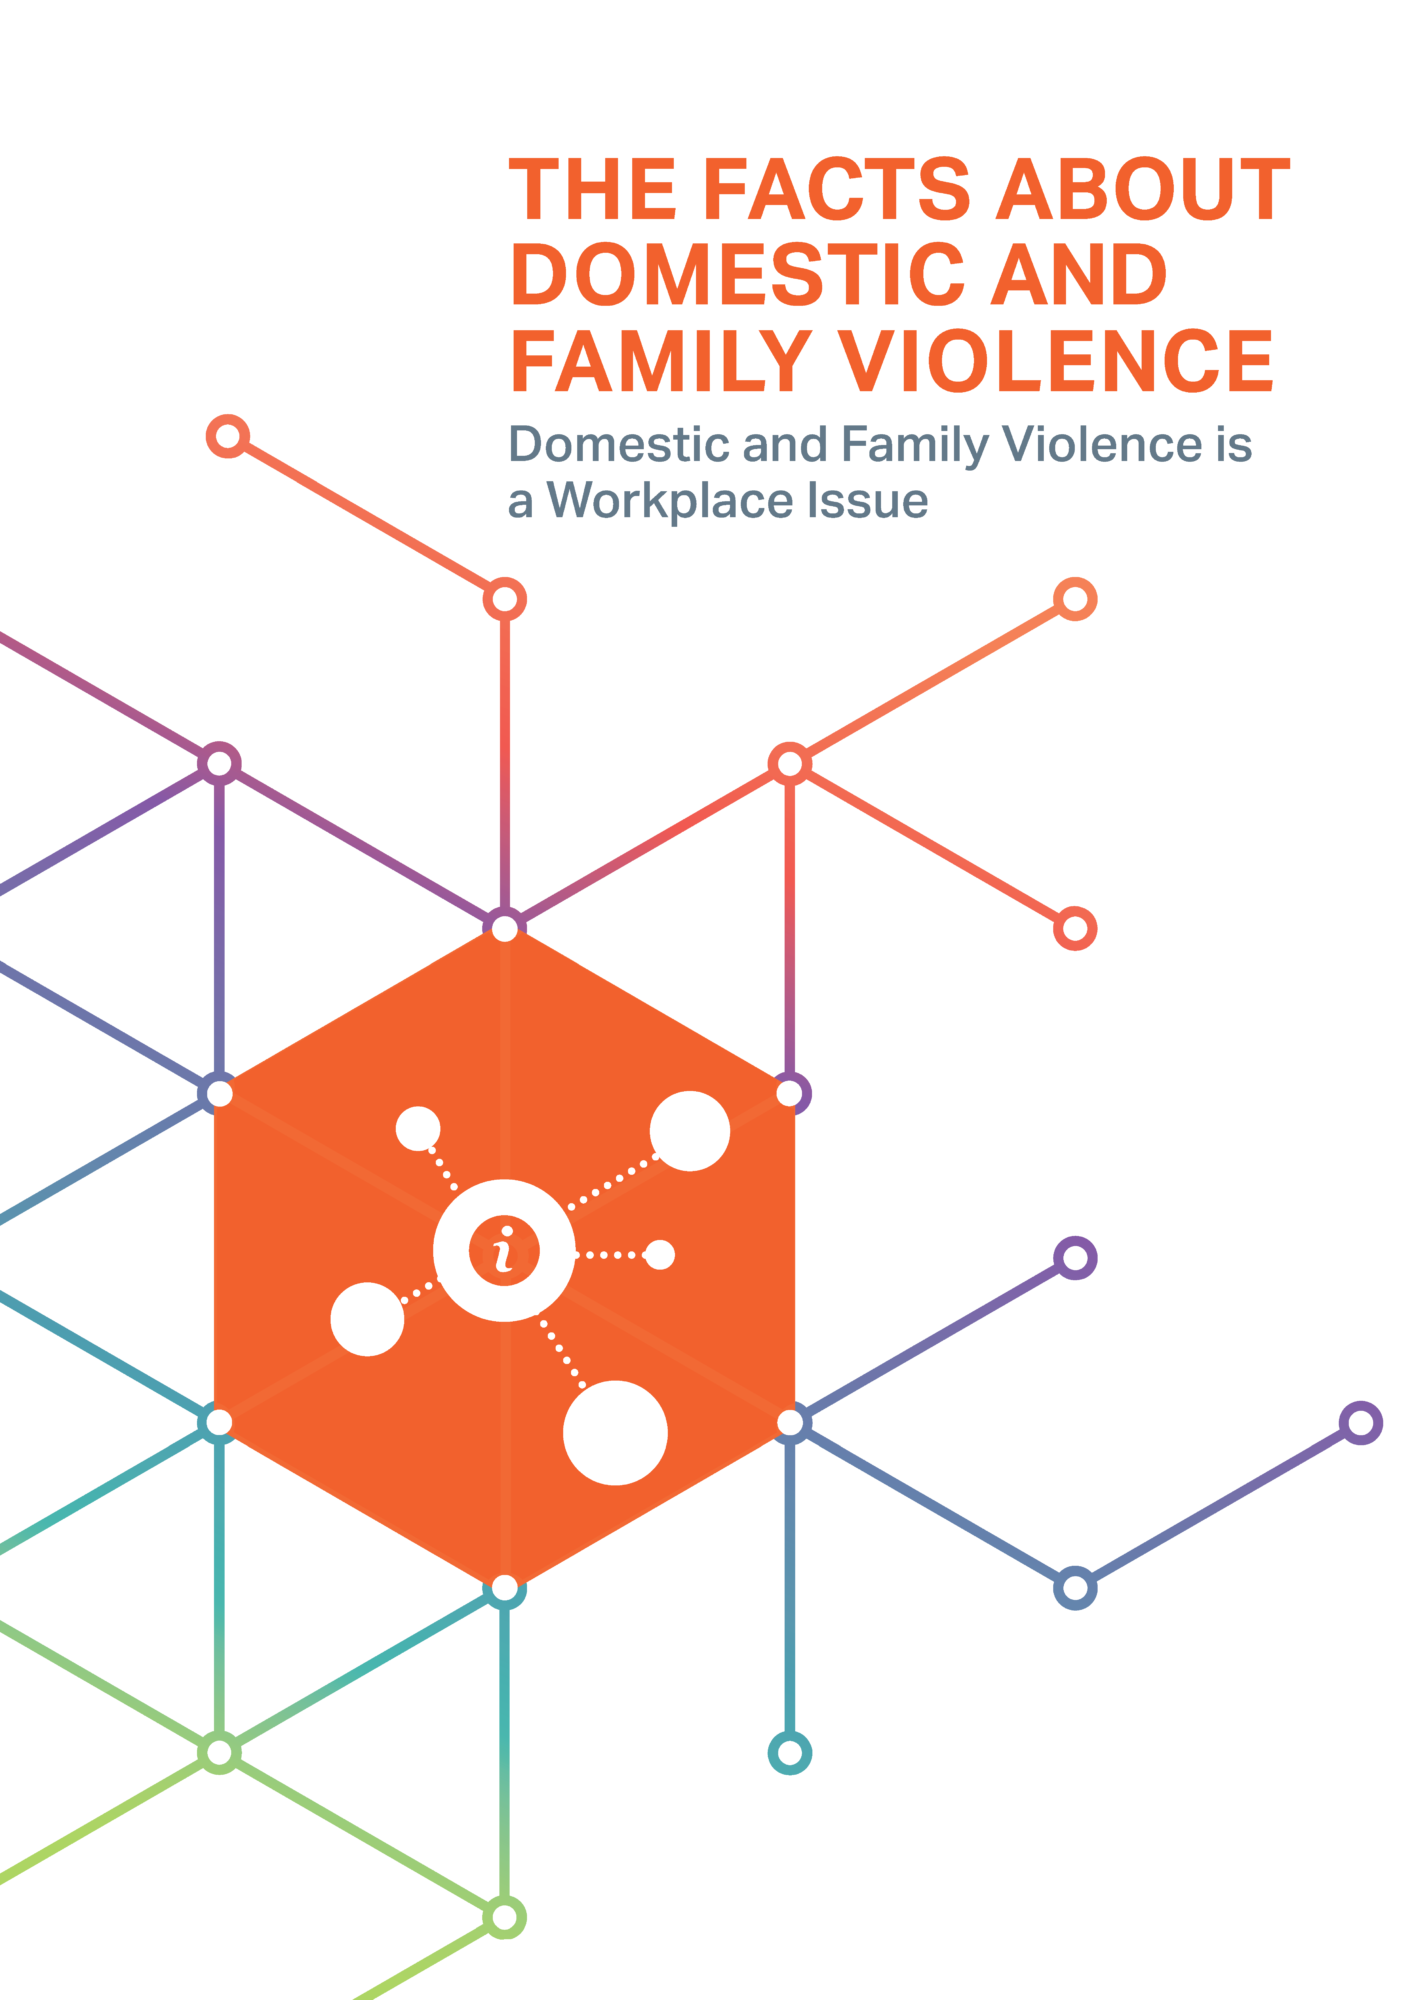 The Facts About Domestic and Family Violence